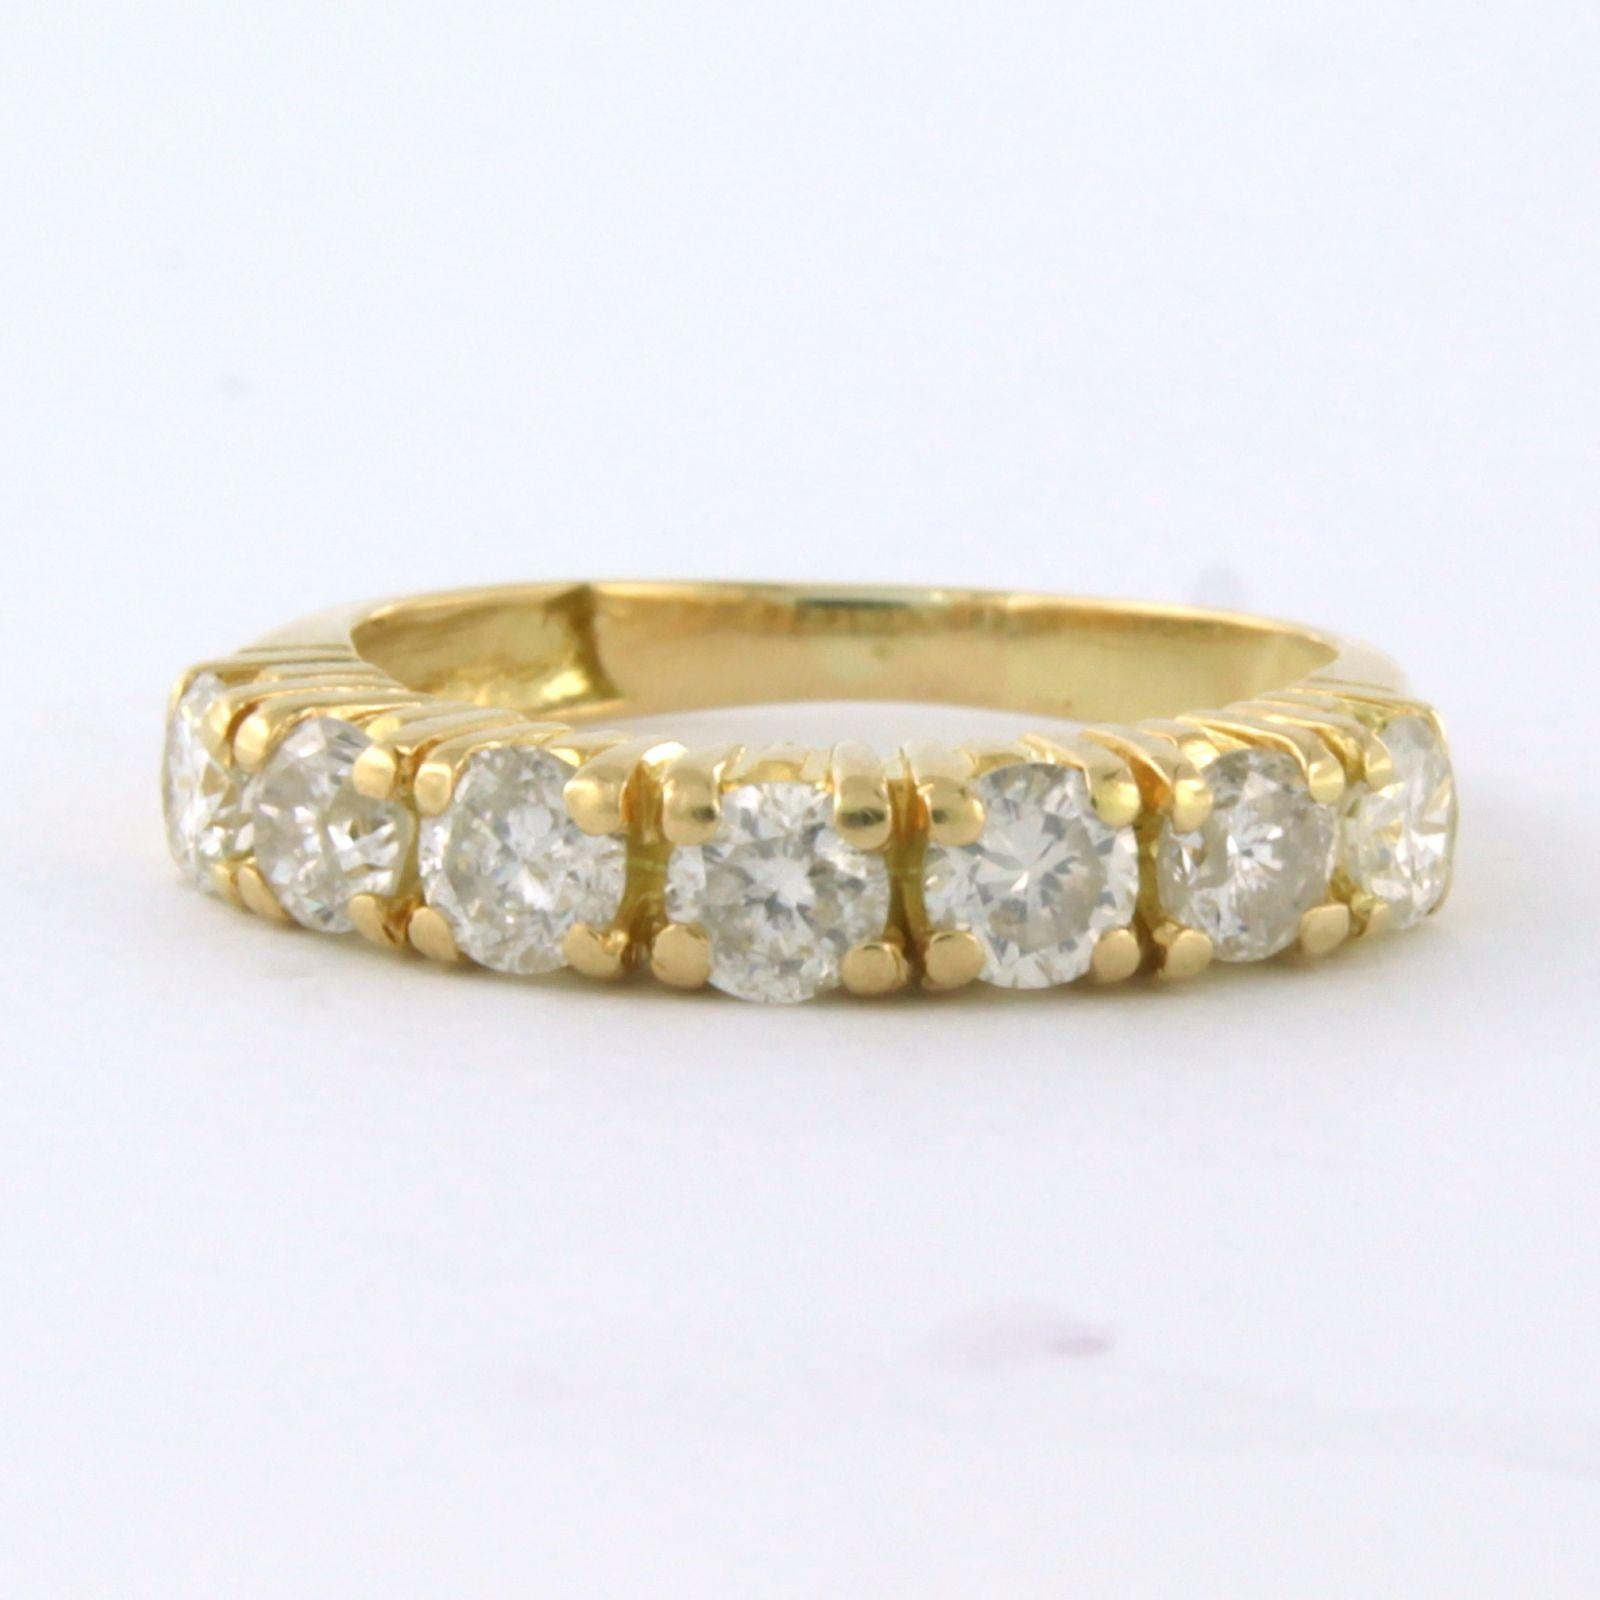 18 kt yellow gold row ring set with brilliant cut diamonds. 0.97 ct - J/K - SI/piq - ring size U.S. 4 - EU. 15(47)

detailed description:

the top of the ring is 3.6 mm wide by 3.5 mm high

ring size U.S. 4 - EU. 15(47), ring can be enlarged or